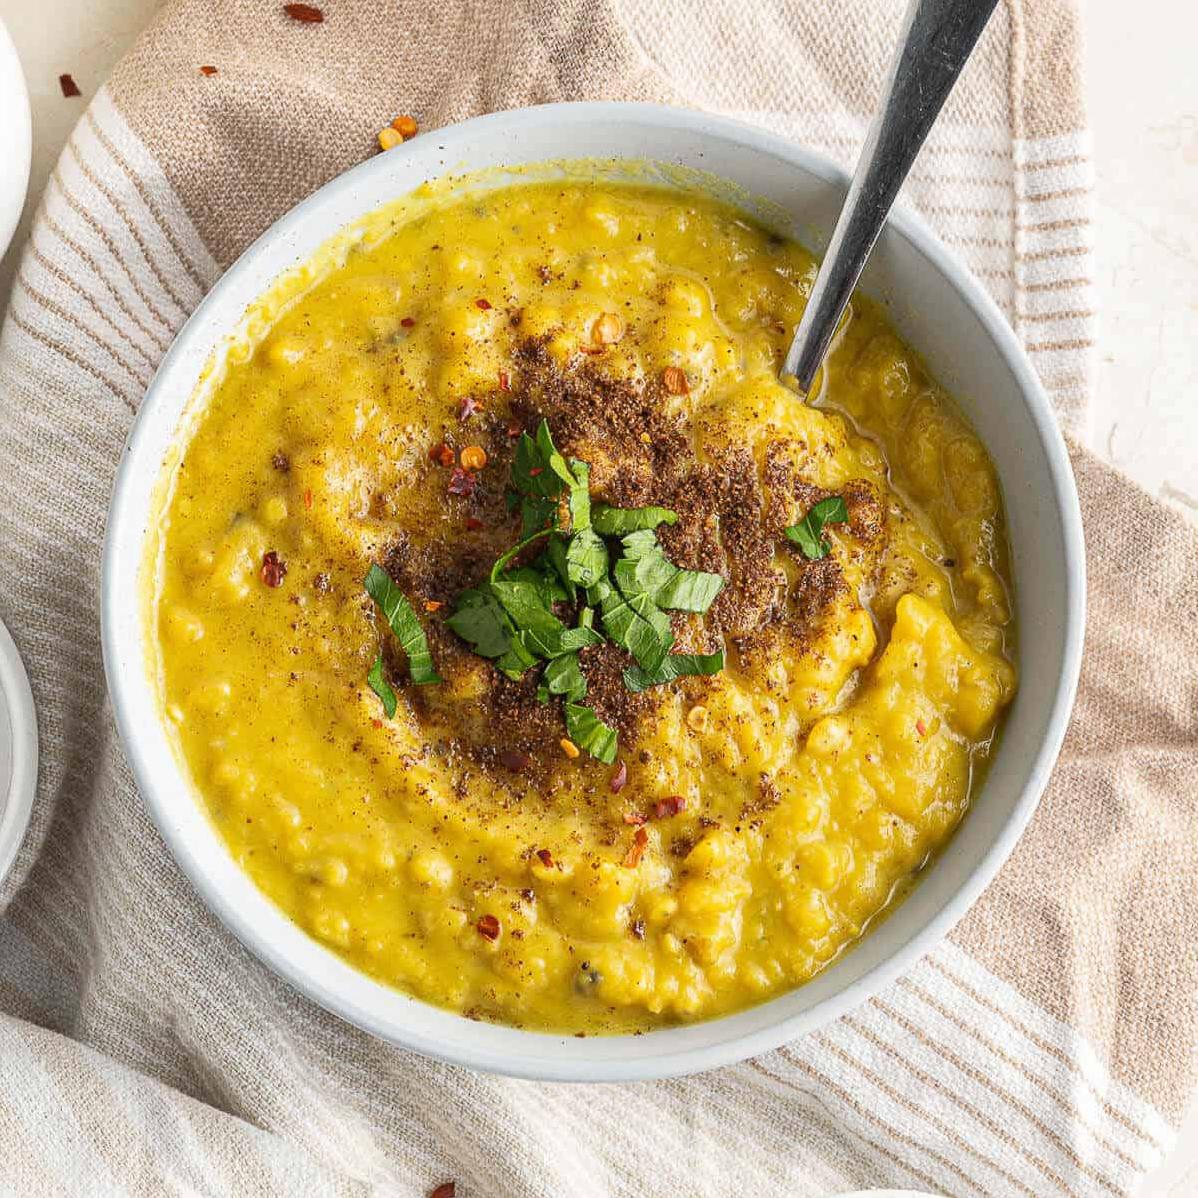  Warm up with a bowl of this hearty yellow lentil soup.